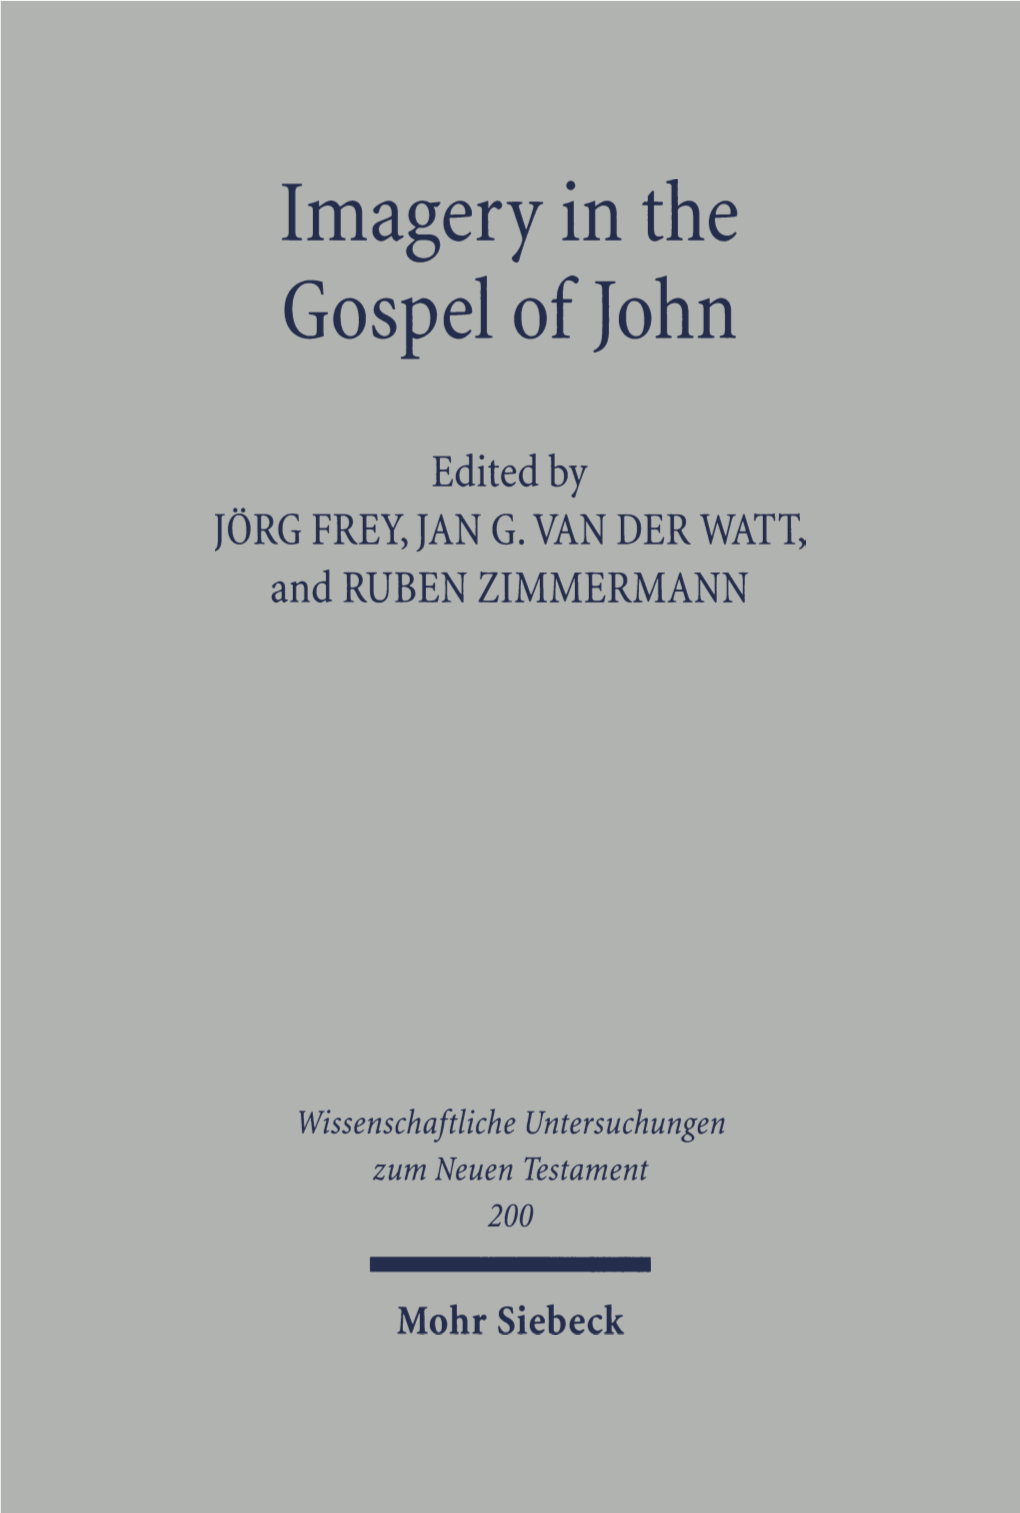 Imagery in the Gospel of John. Terms, Forms, Themes, and Theology Of